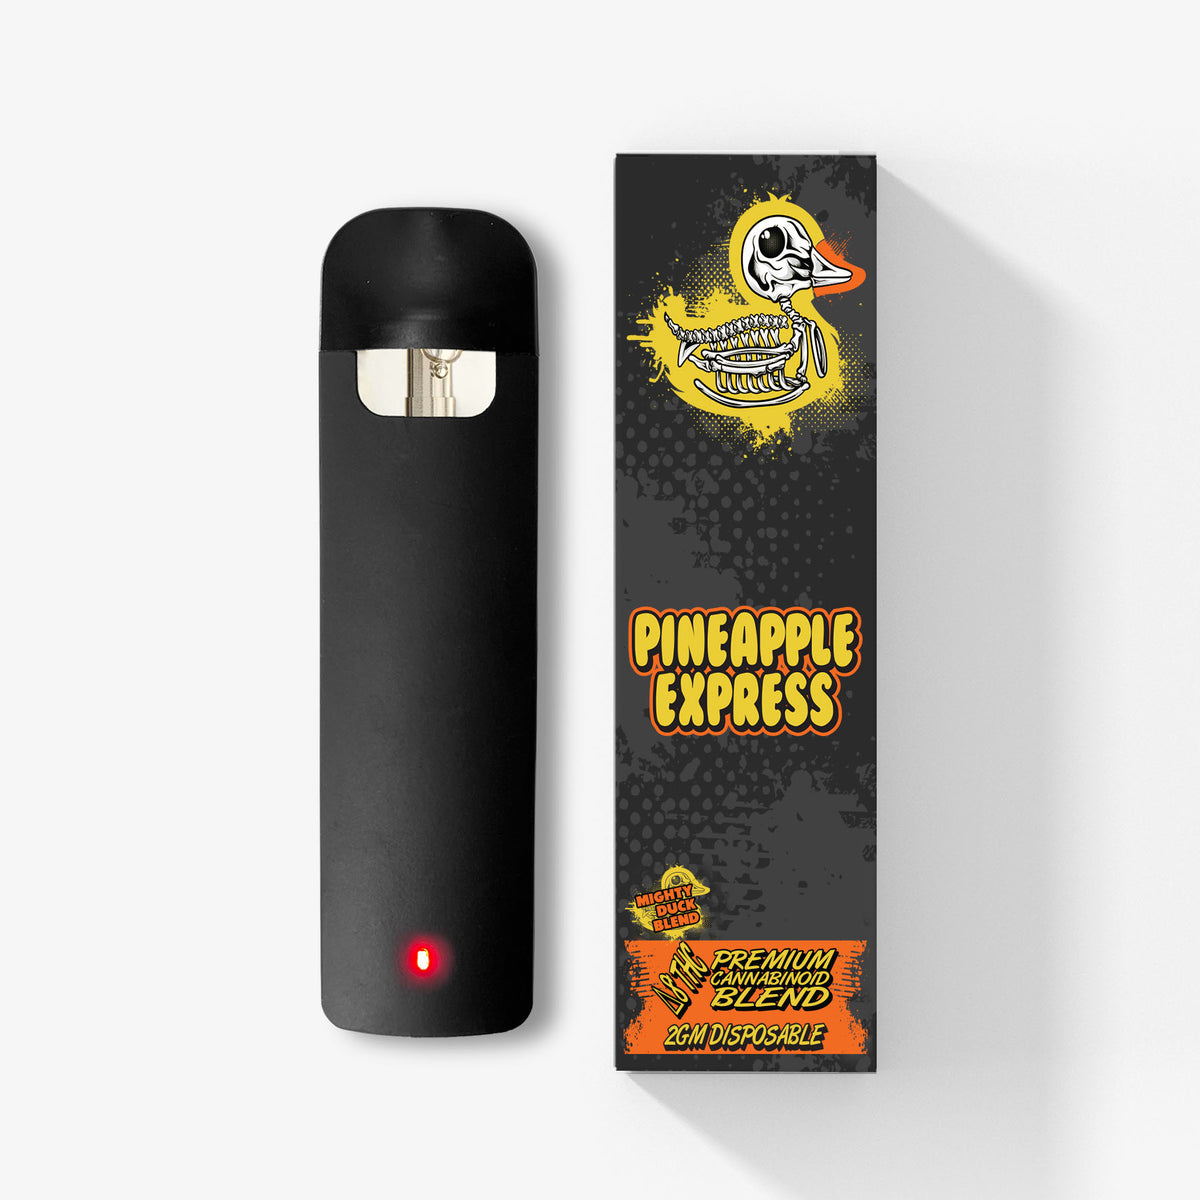 rubber duckie blended disposable pineapple express 2 gram